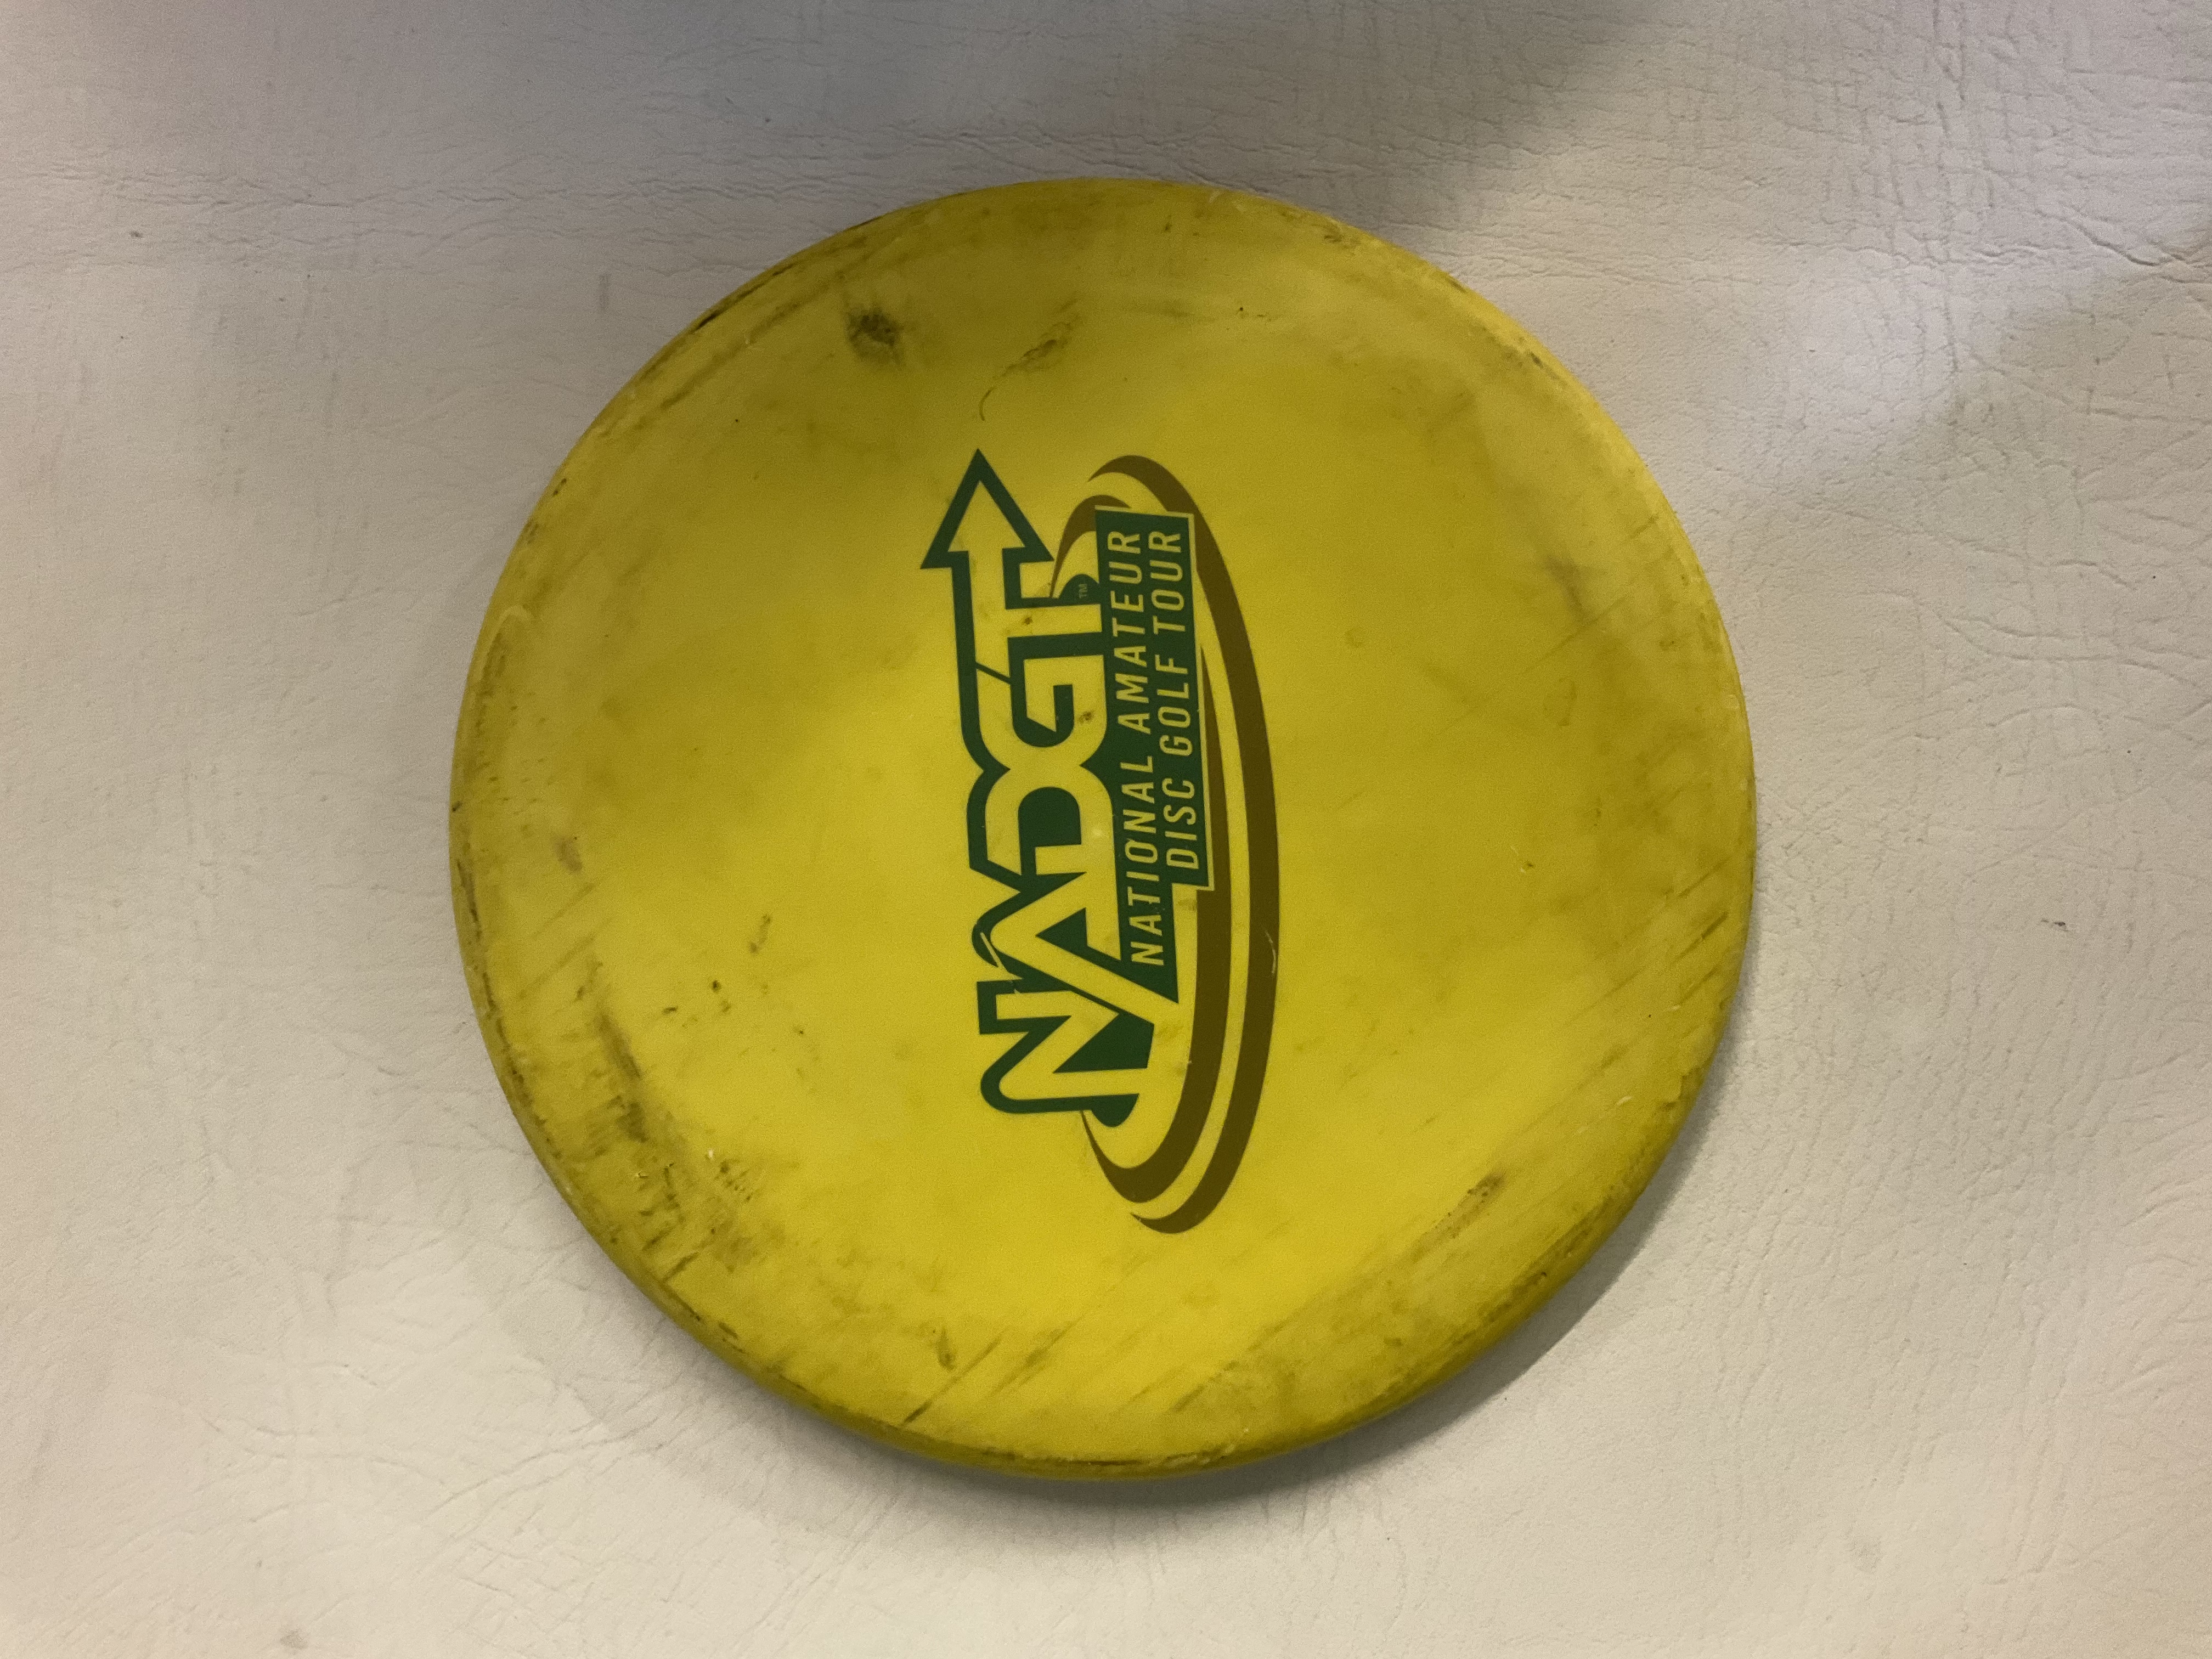 Used NADGT Disc Golf Putters Disc Golf Putters